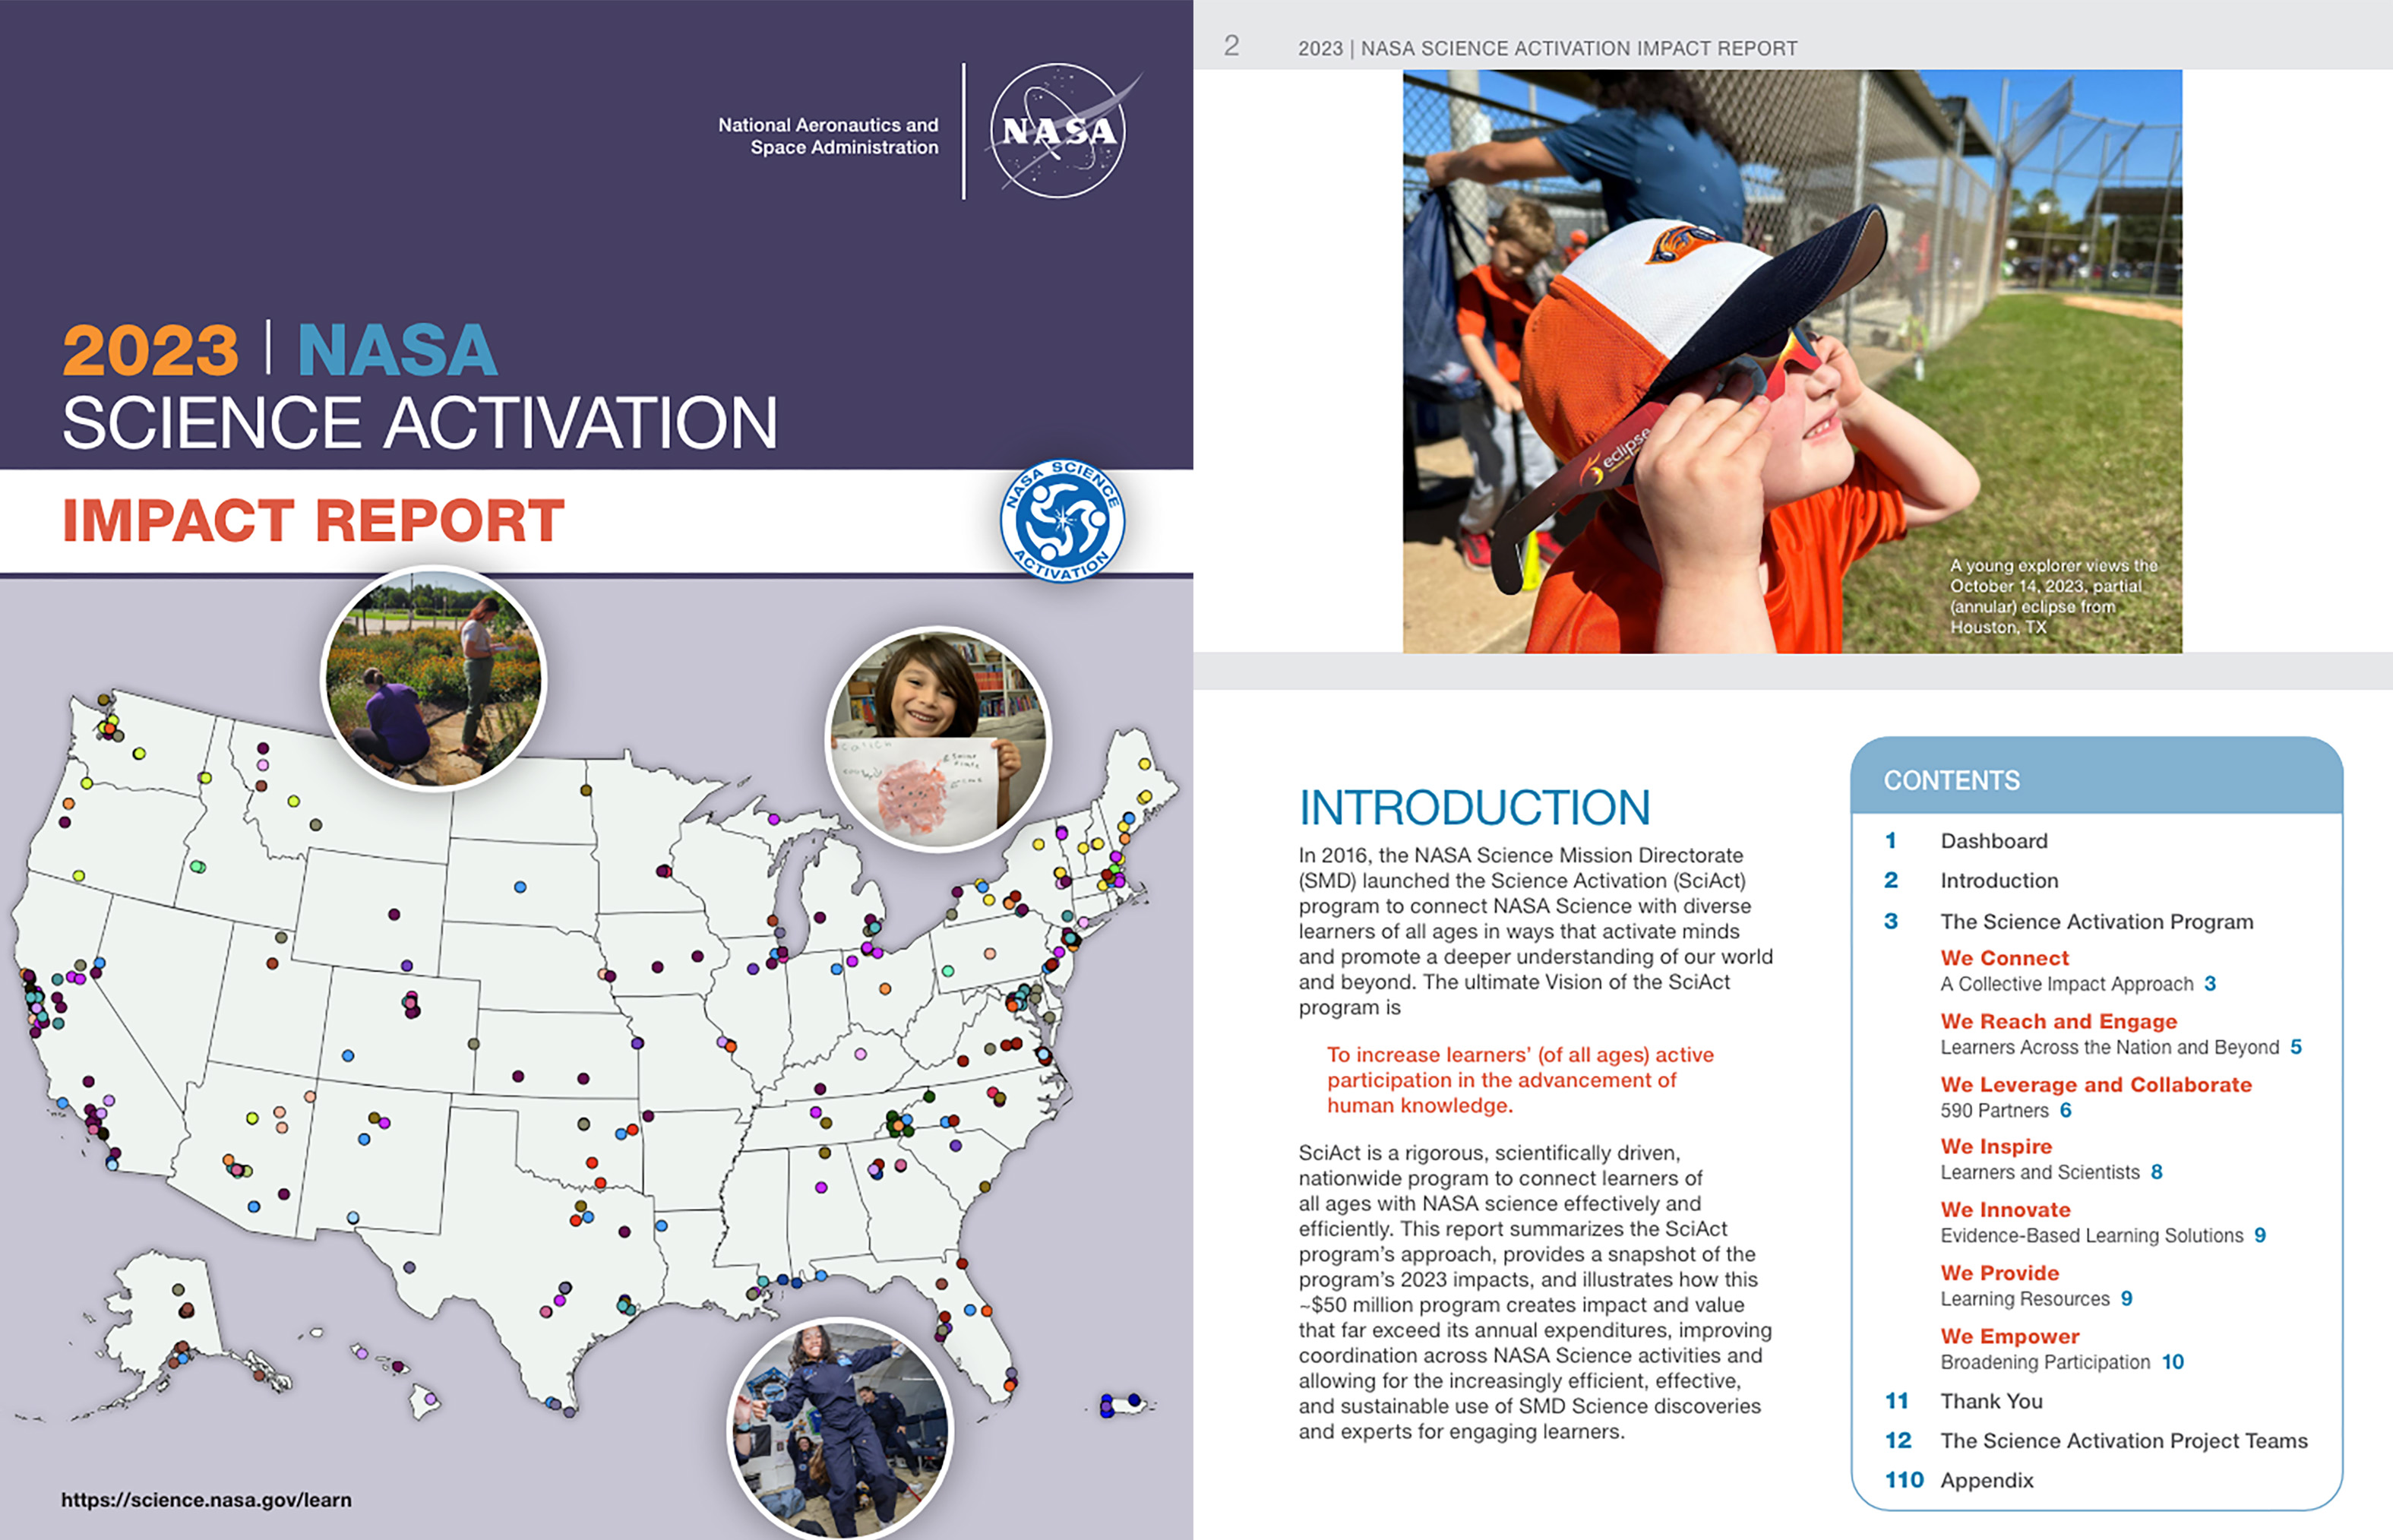 A report cover page with the title 2023 NASA Science Activation Impact Report. Below the title is an illustrated map of the United States with hundreds of colored icon pins marking locations. There are three circled photos highlighting students participating in various educational activities.